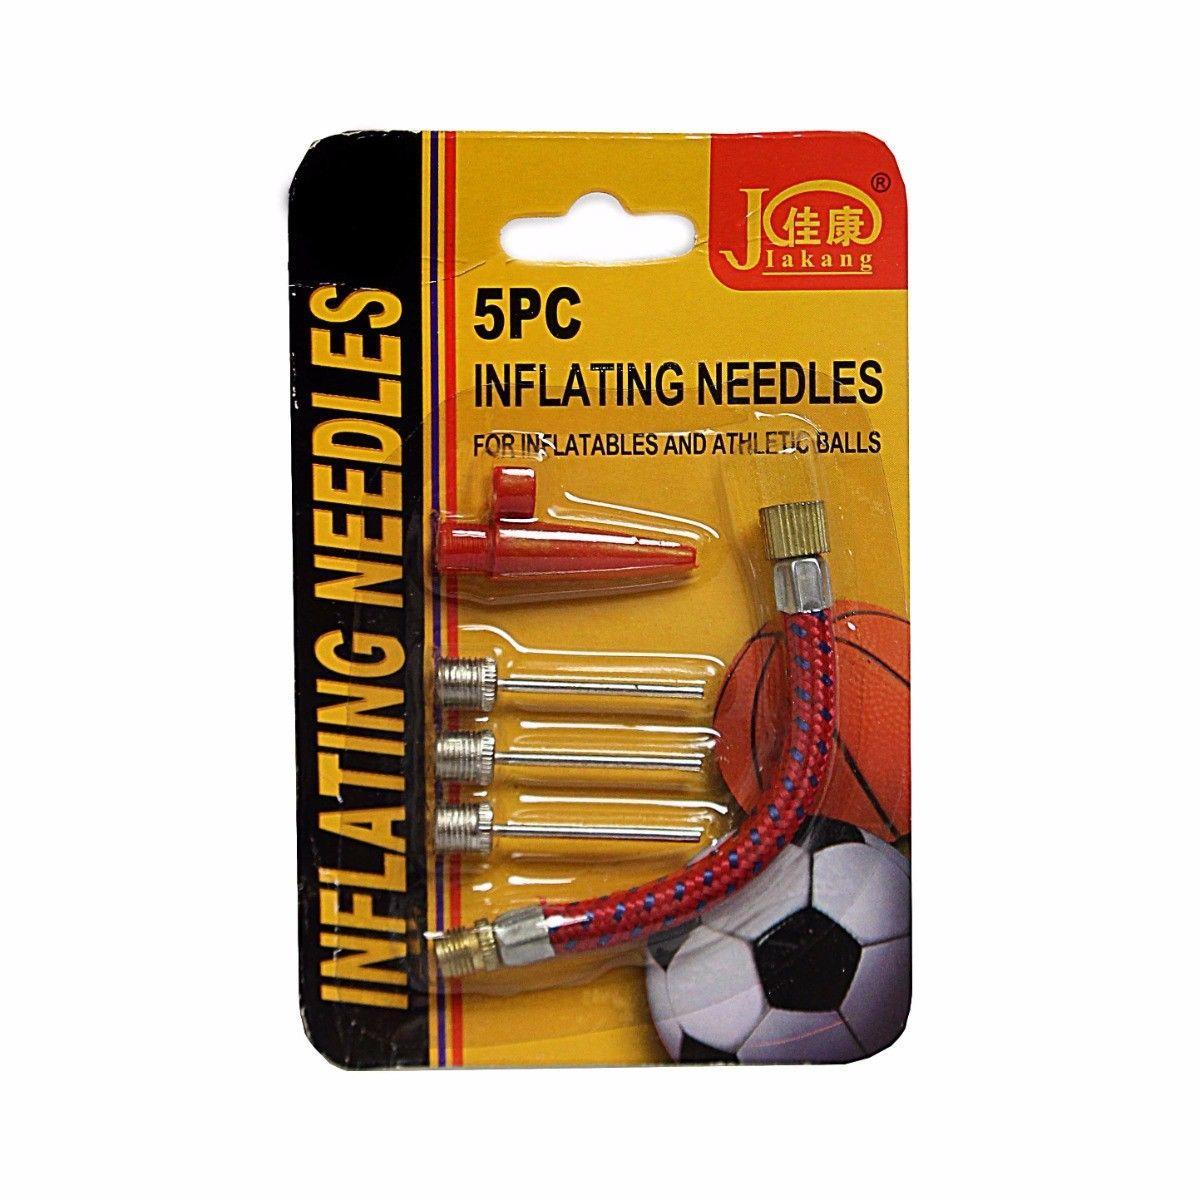 Pack Of 5 Inflating Needles Suitable For Balls And Inflatables  2552 (Large Letter Rate)